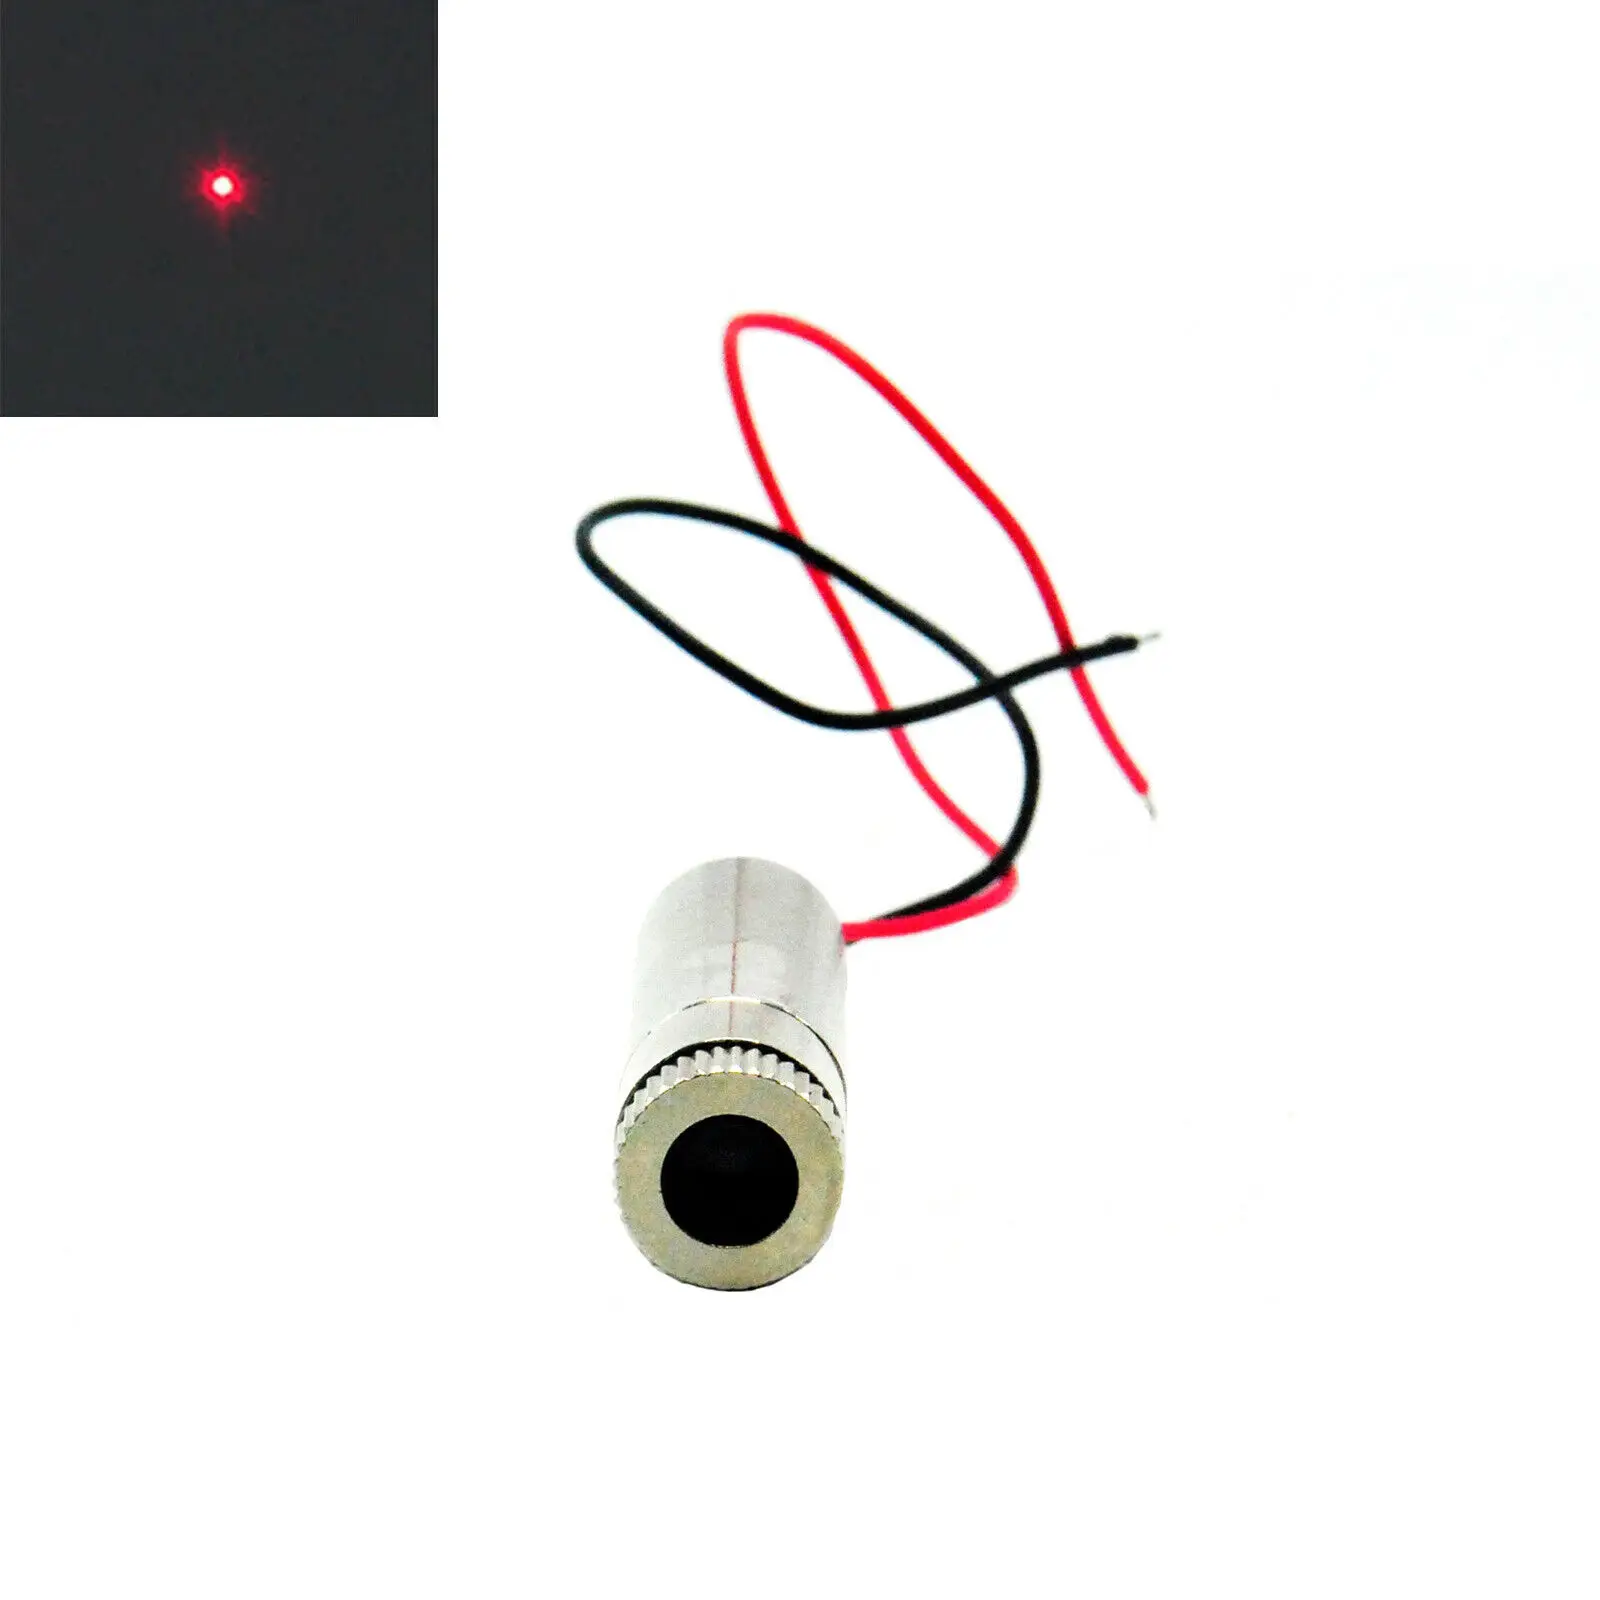 650nm 5mW Dot 3-5V 12x35mm Focusable Red Laser Module Diode w/ Driver in 650nm 5mw dot 3 5v 12x35mm focusable red laser module diode w driver in